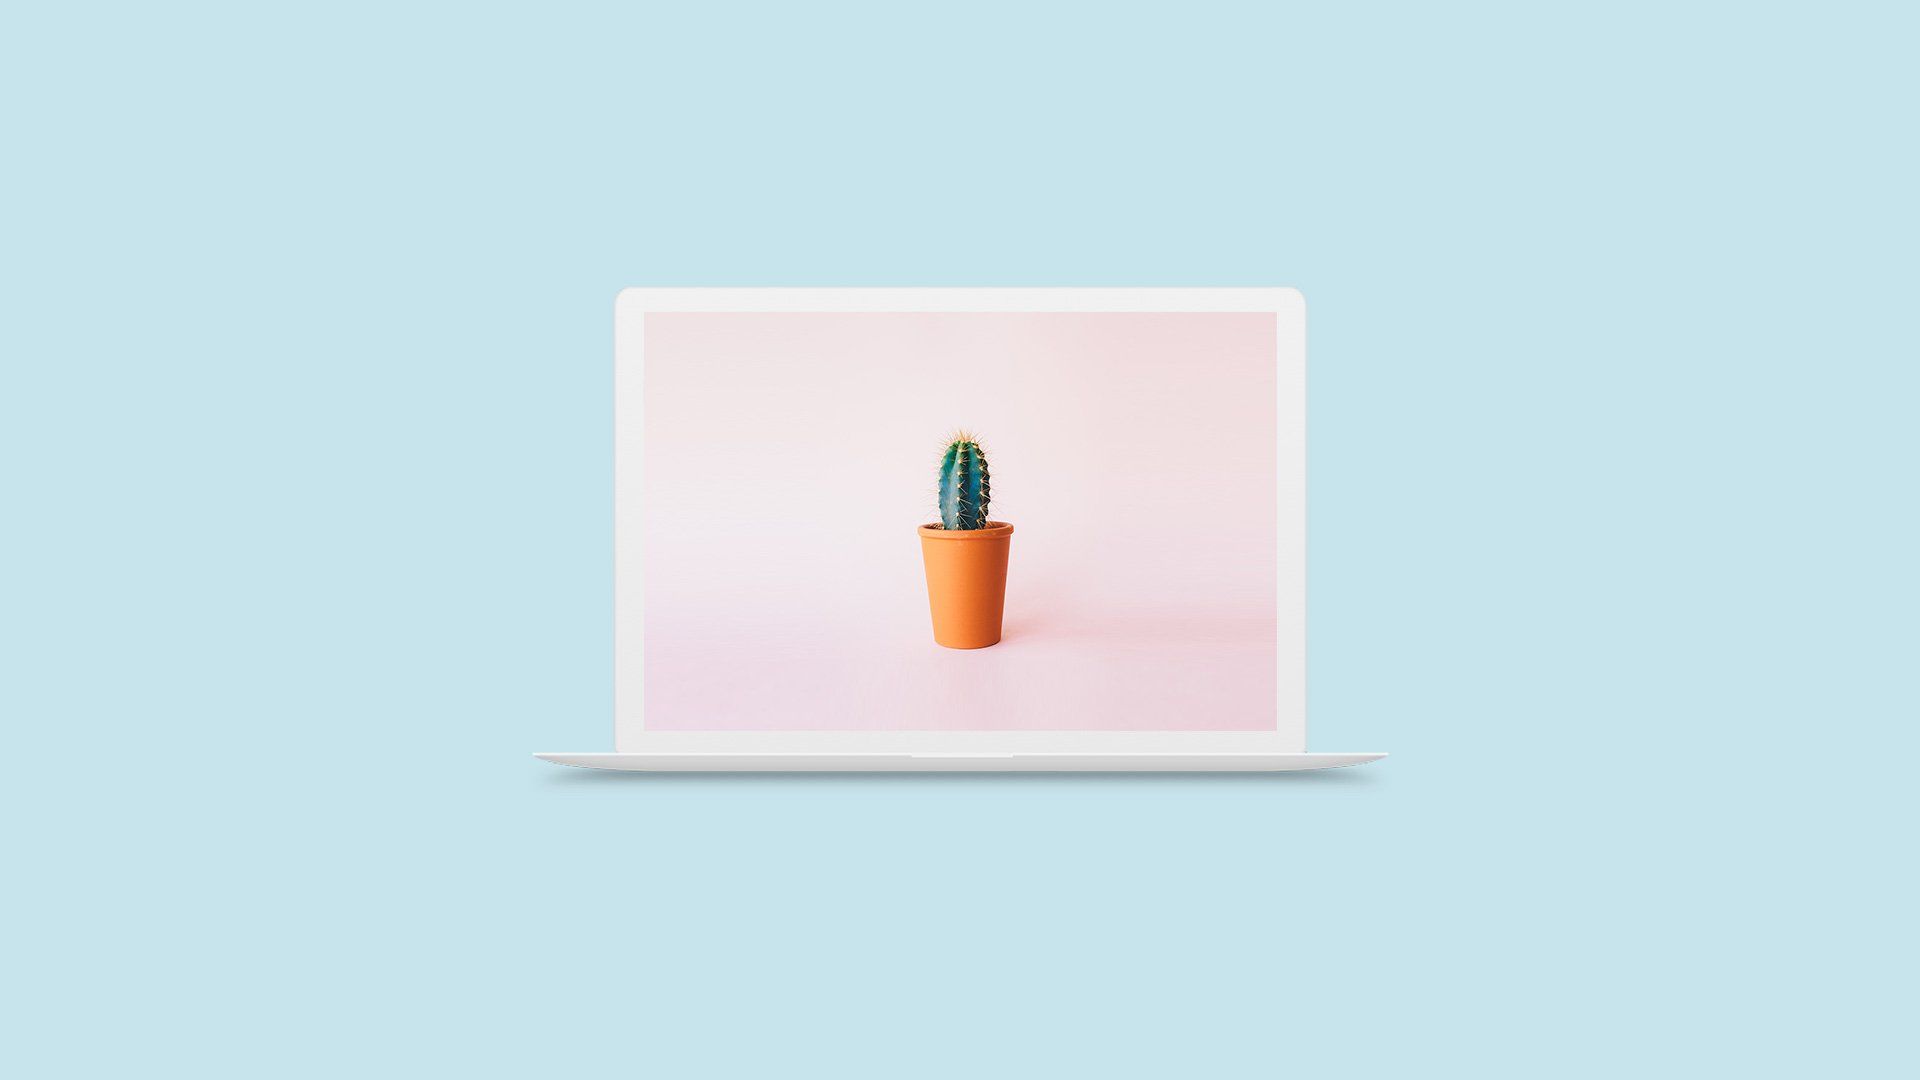 A laptop with a picture of a cactus in a pot on the screen.